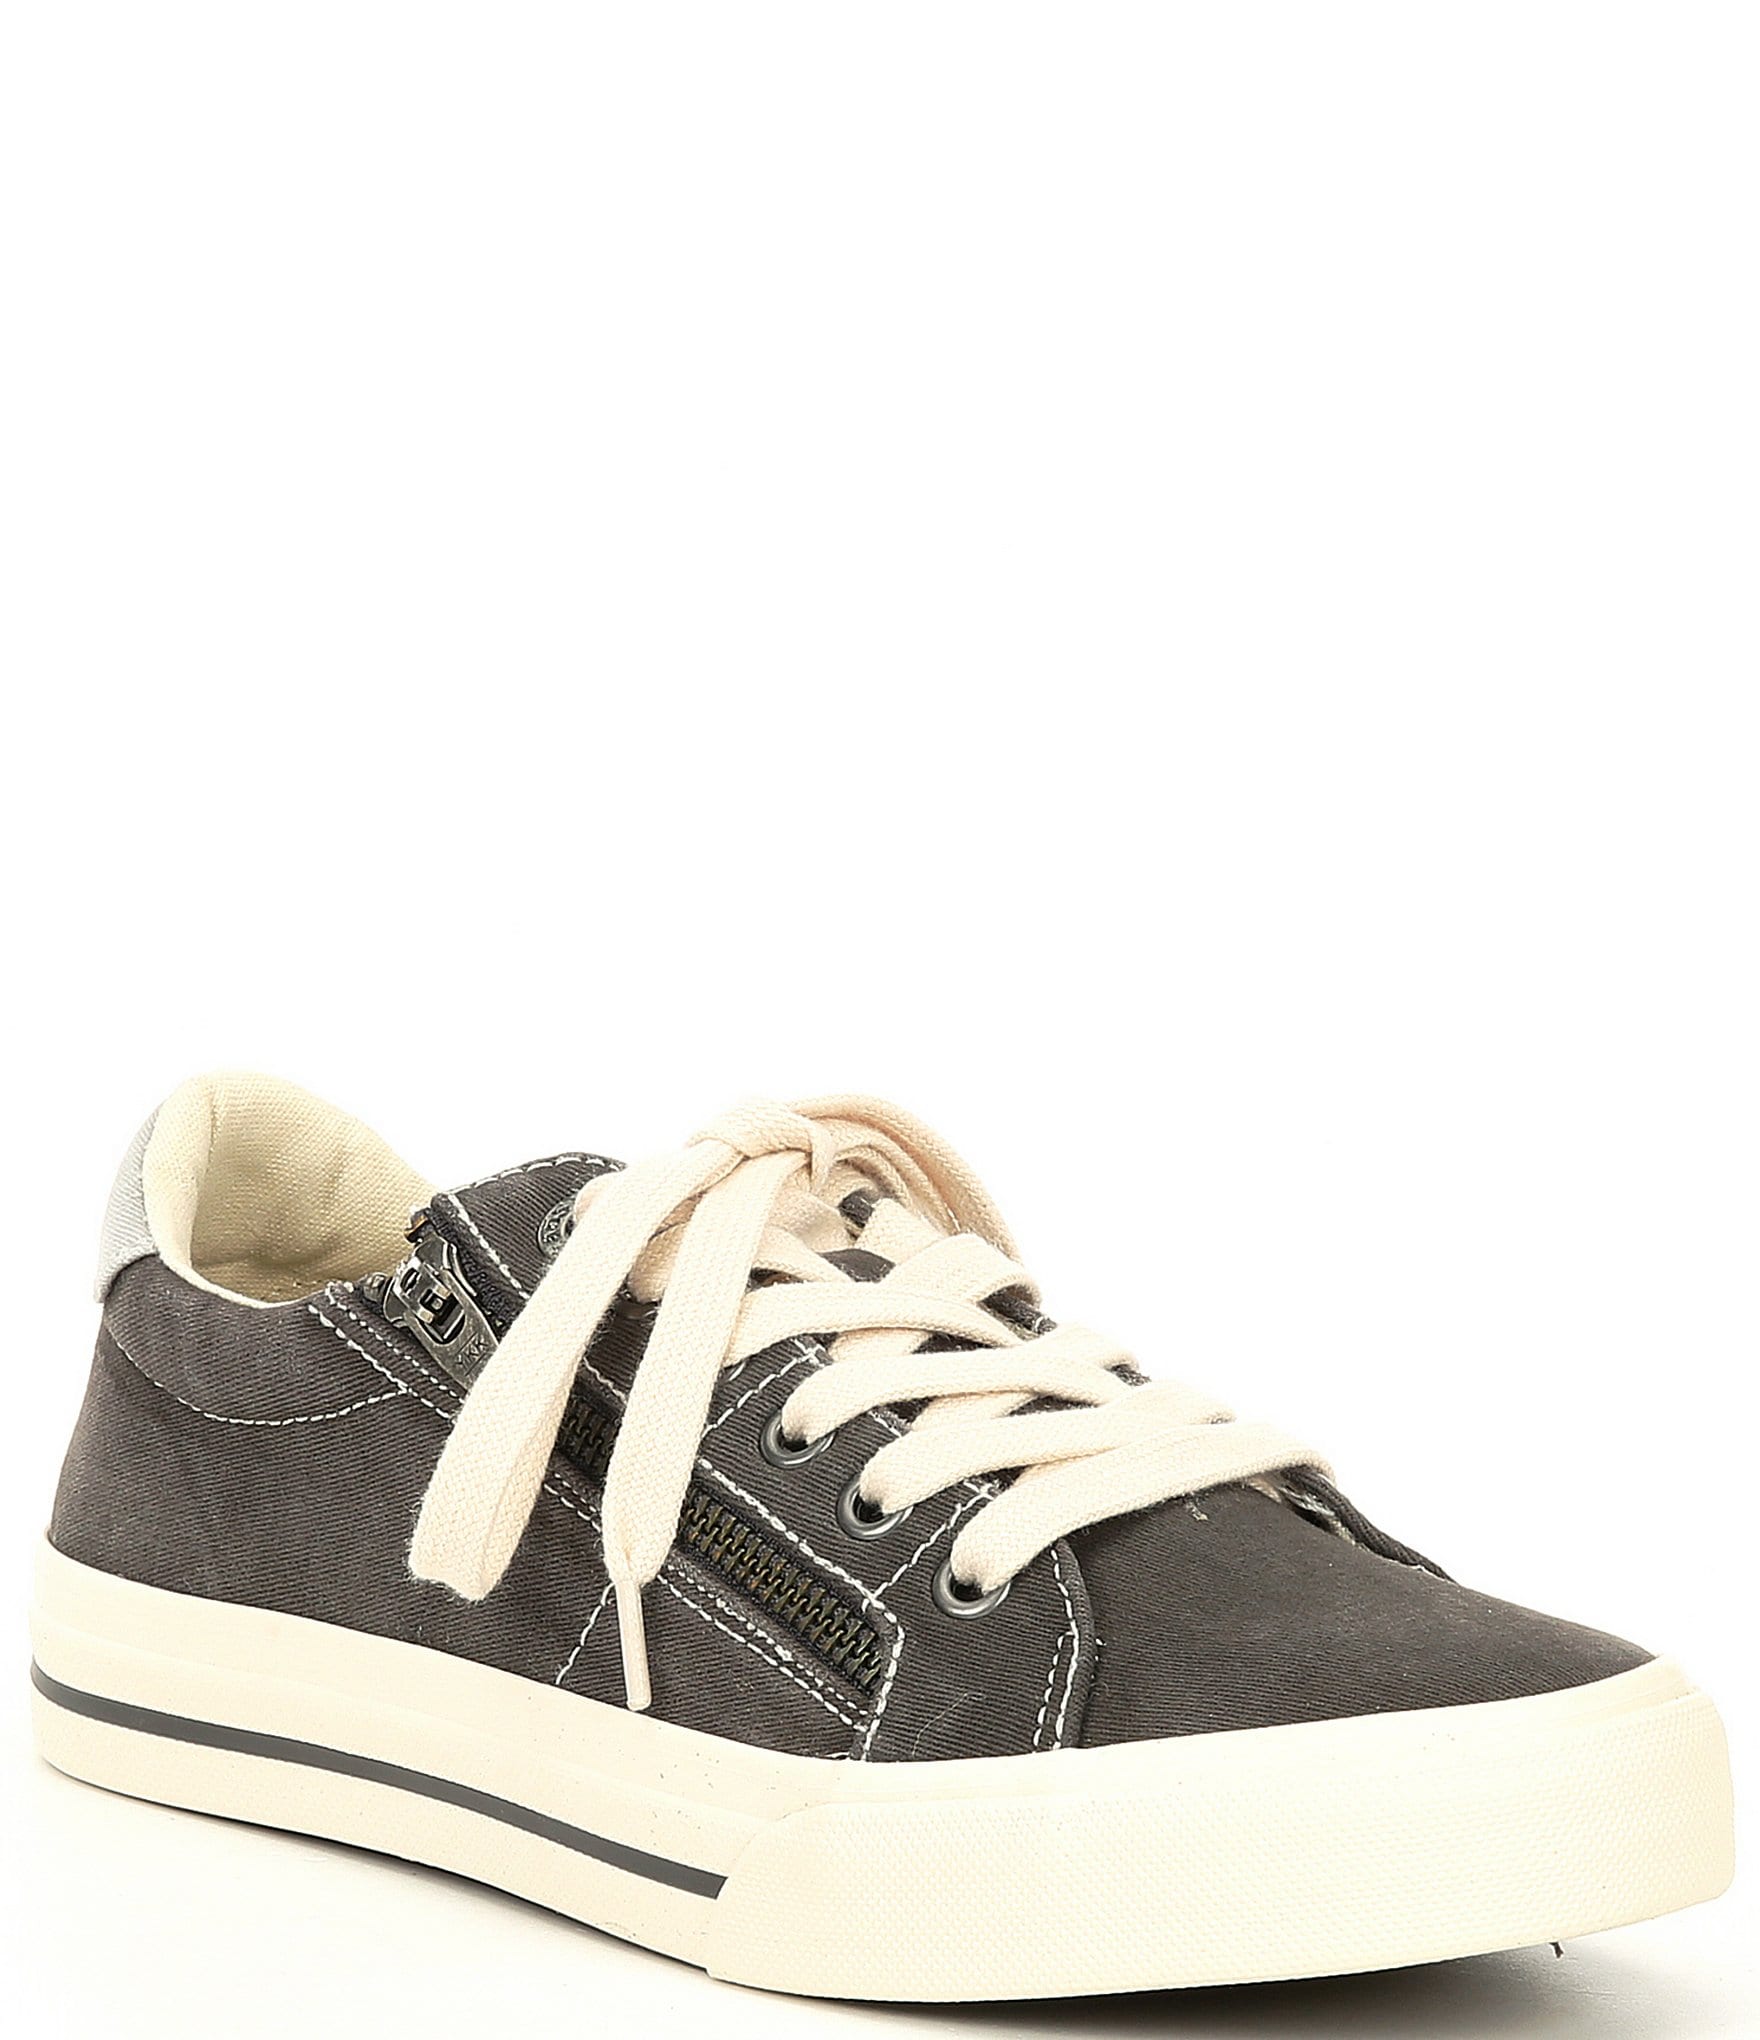 taos leather sneakers